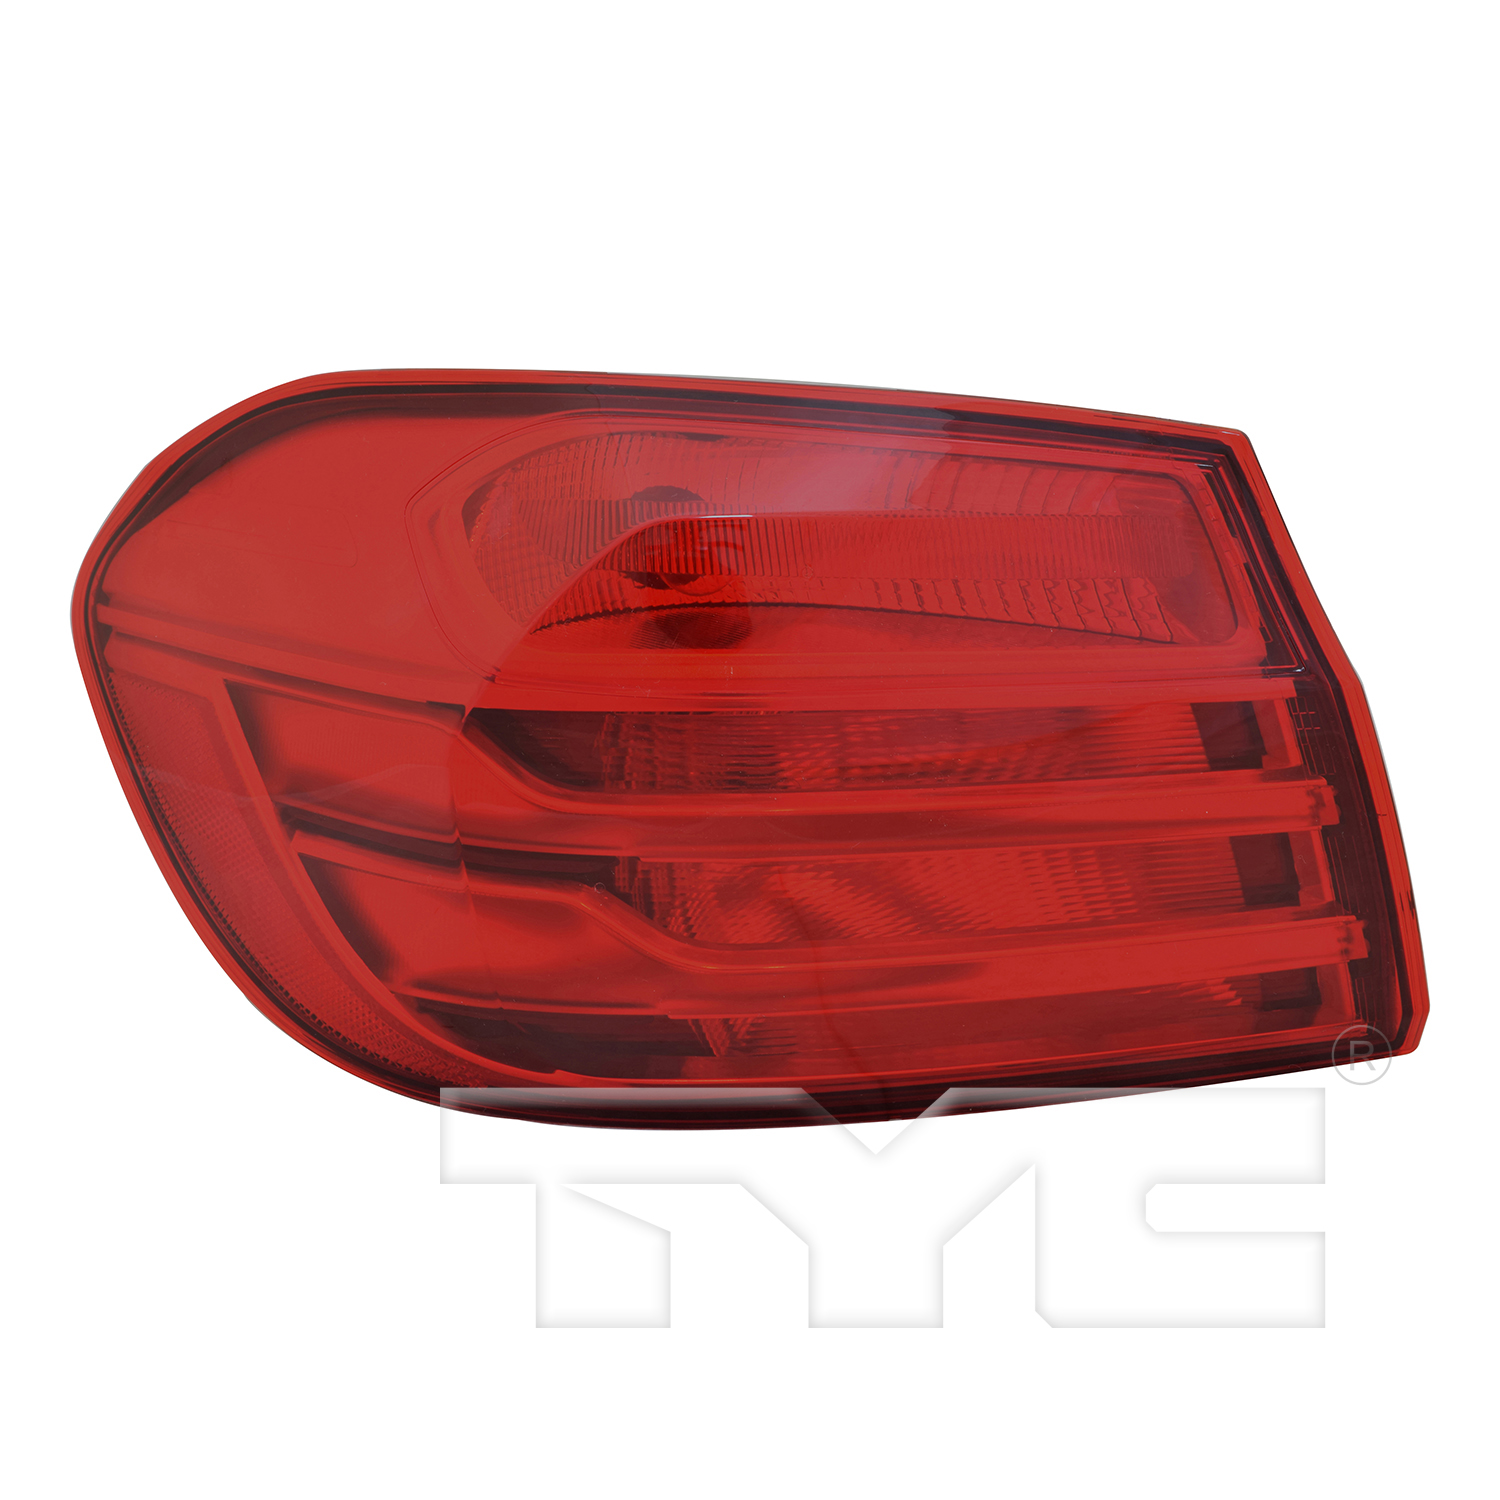 Aftermarket TAILLIGHTS for BMW - M4, M4,15-17,LT Taillamp assy outer